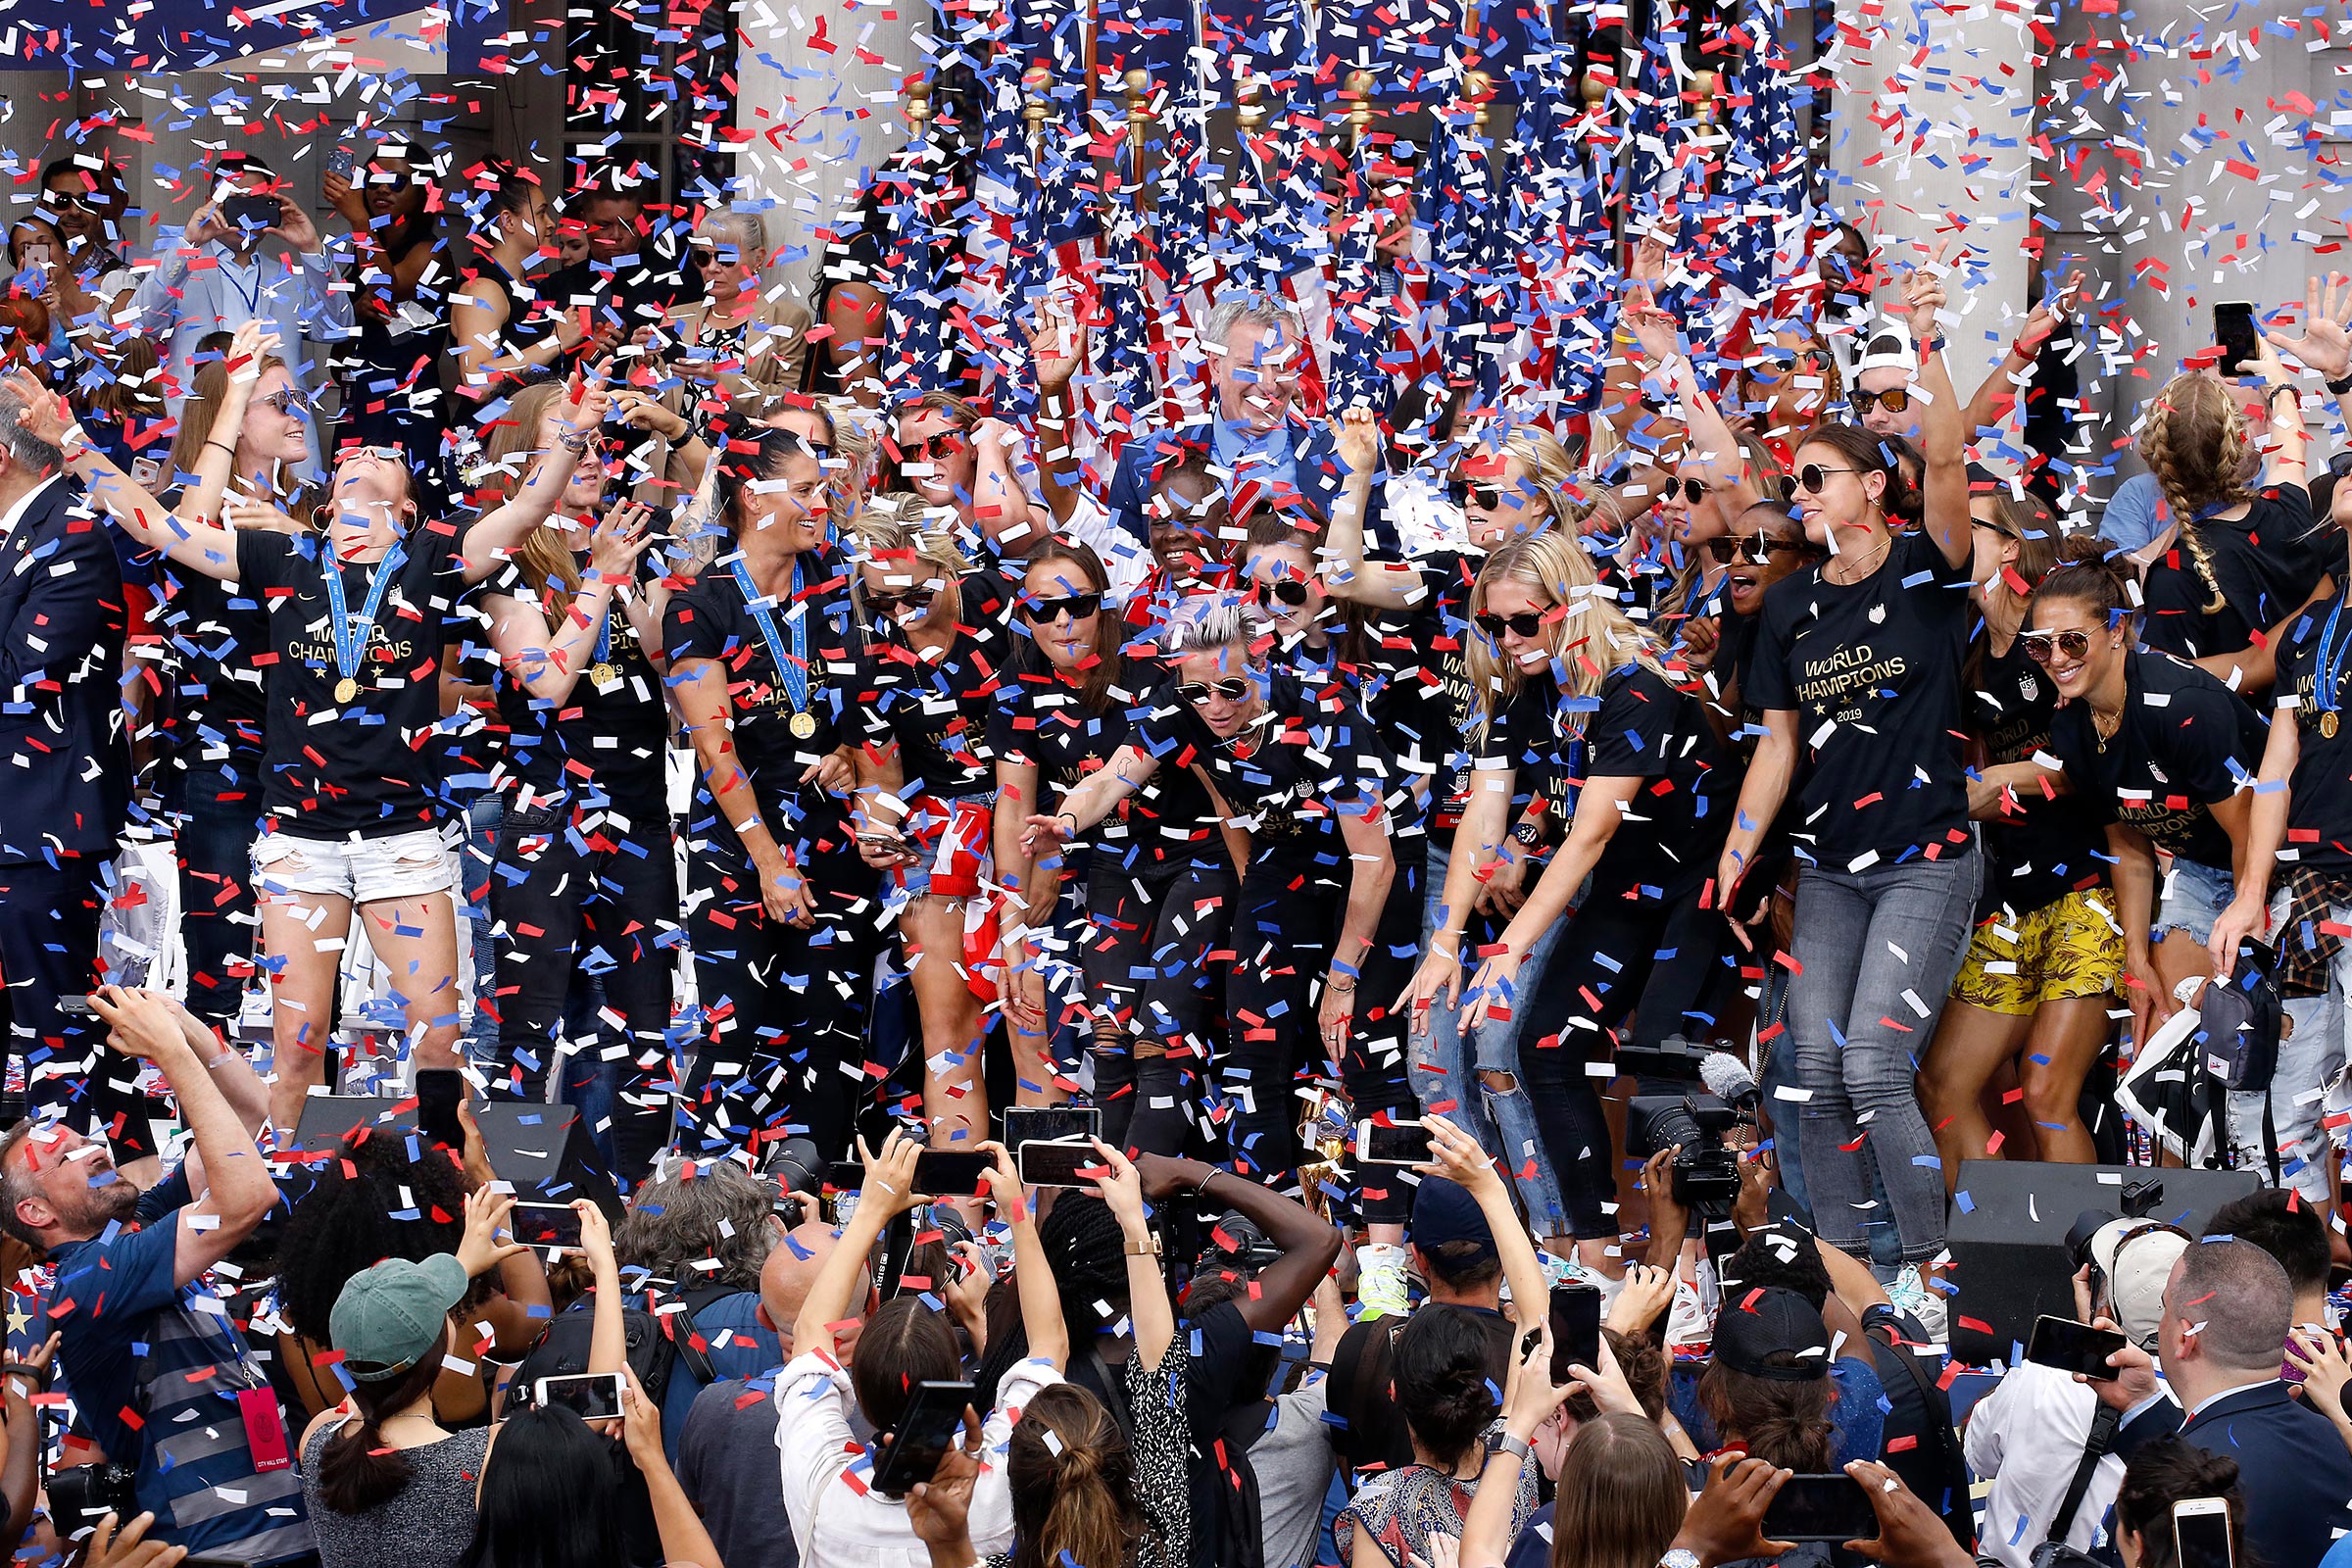 The U.S. team soaks in adulation at a ticker-tape parade in New York City on July 10